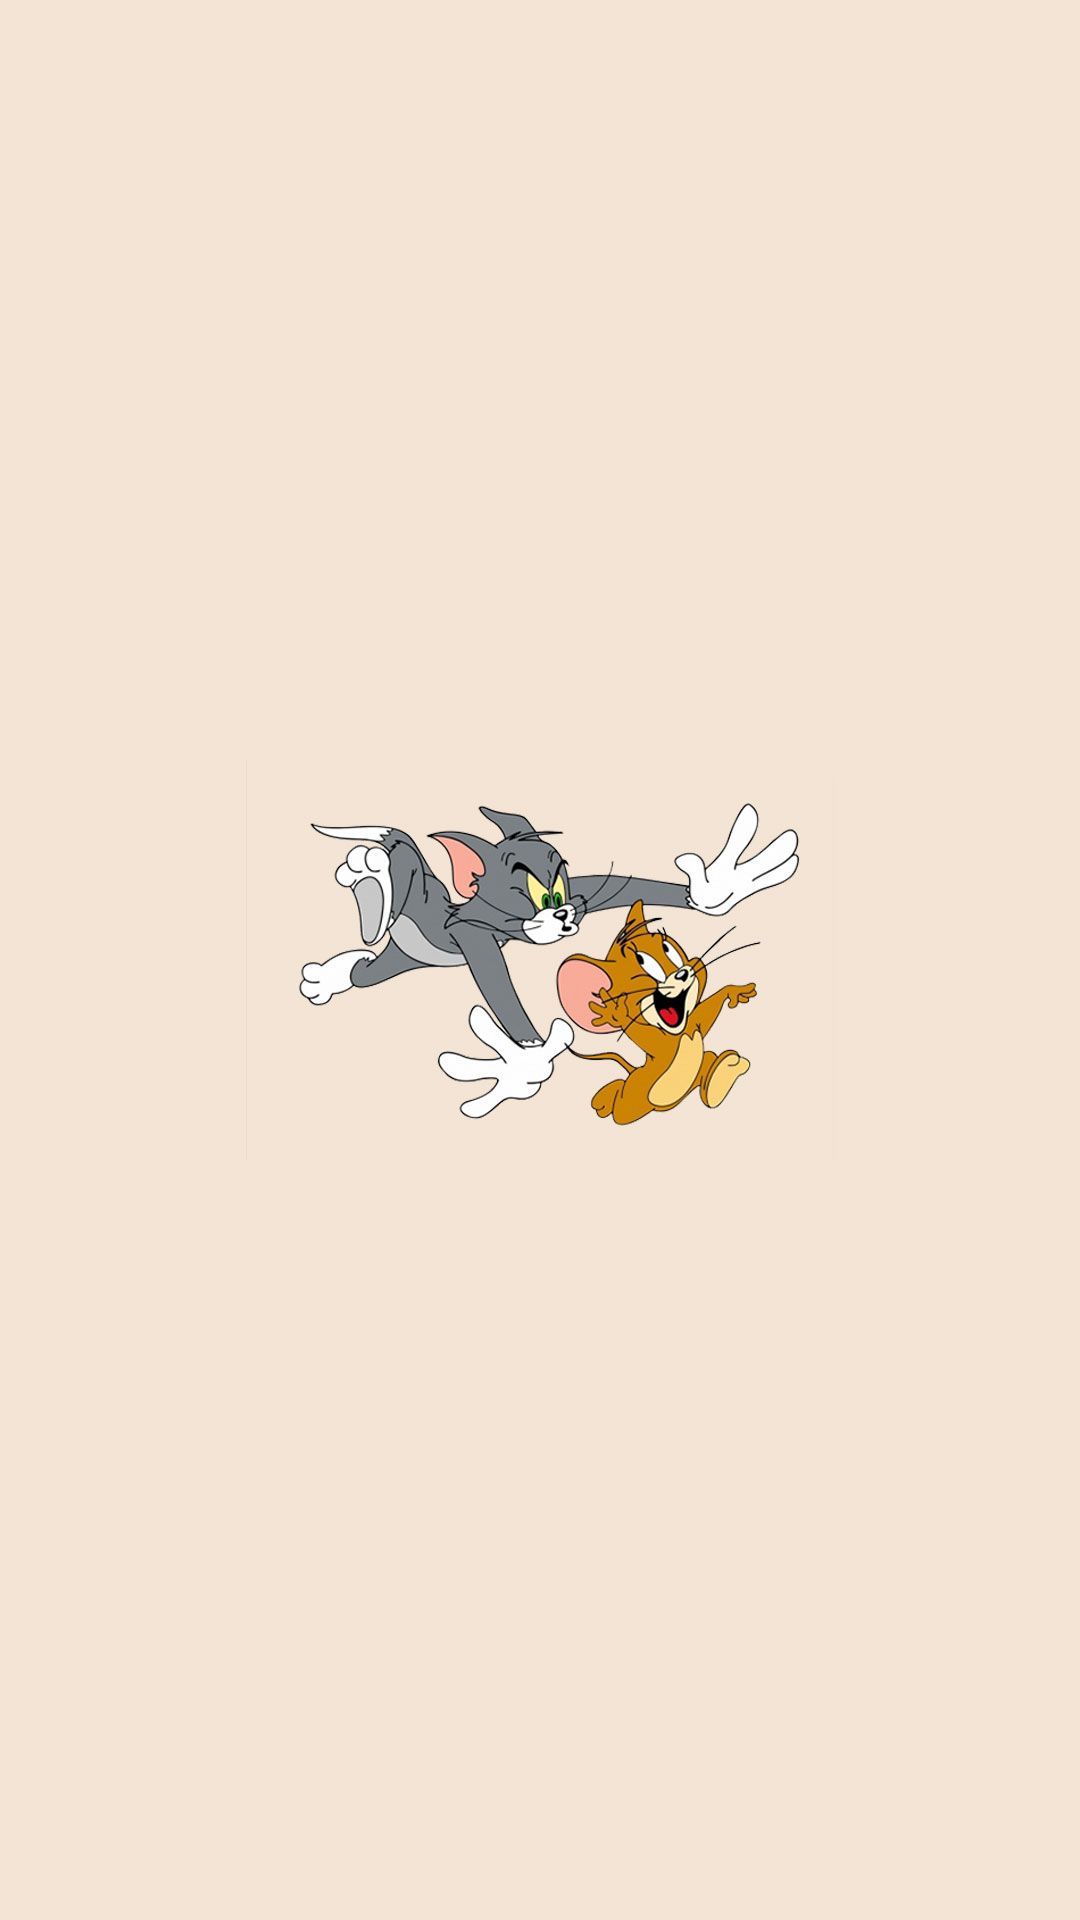 Tom and Jerry Quote iPhone Wallpaper #mobile #phone #iphone